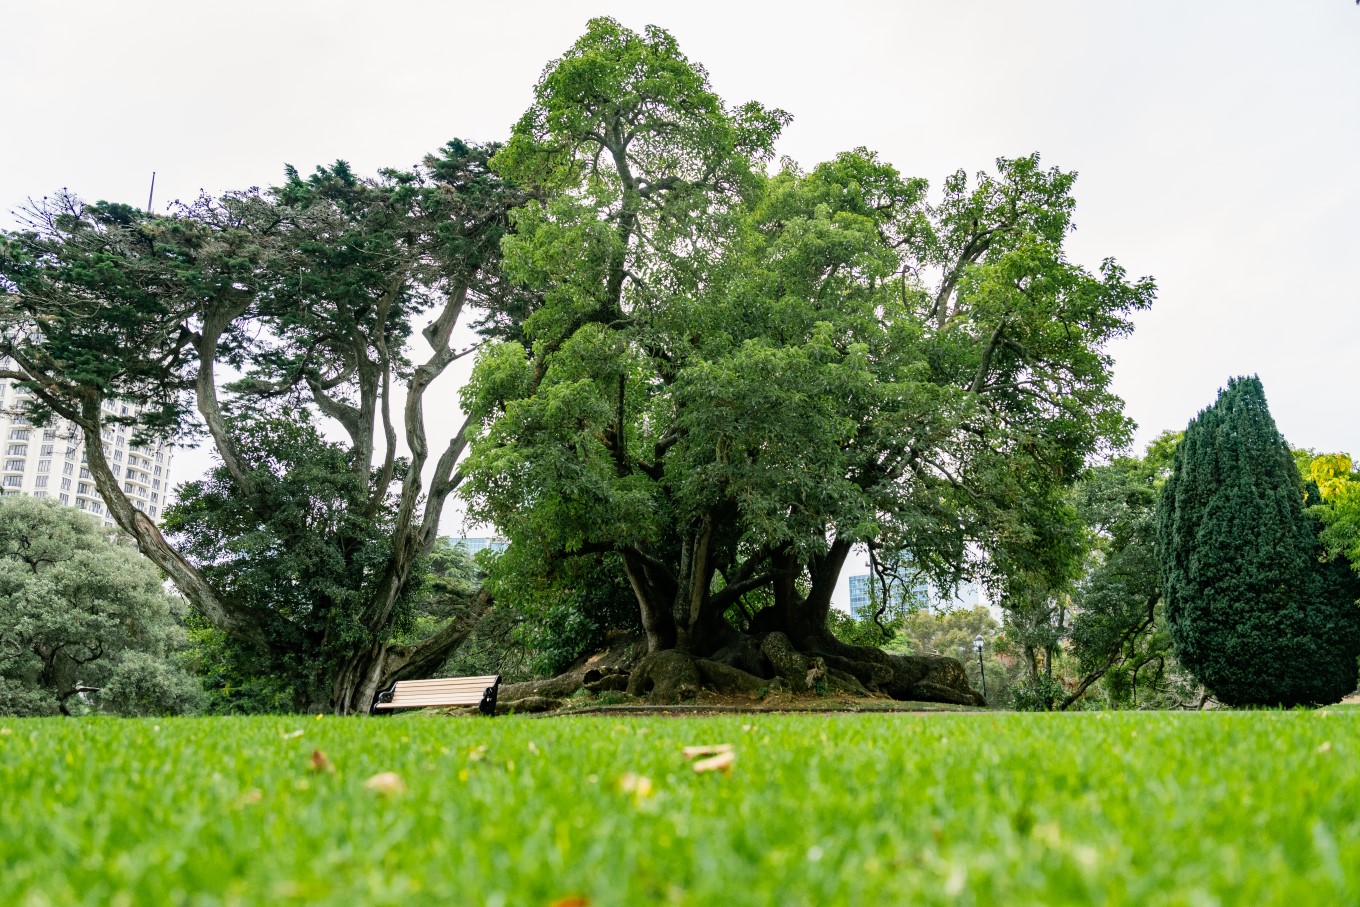 The ombu Phytolacca dioica tree in Albert Park was planted by Governor George Grey. The large sprawling tree is native to the Pampas regions of South America.